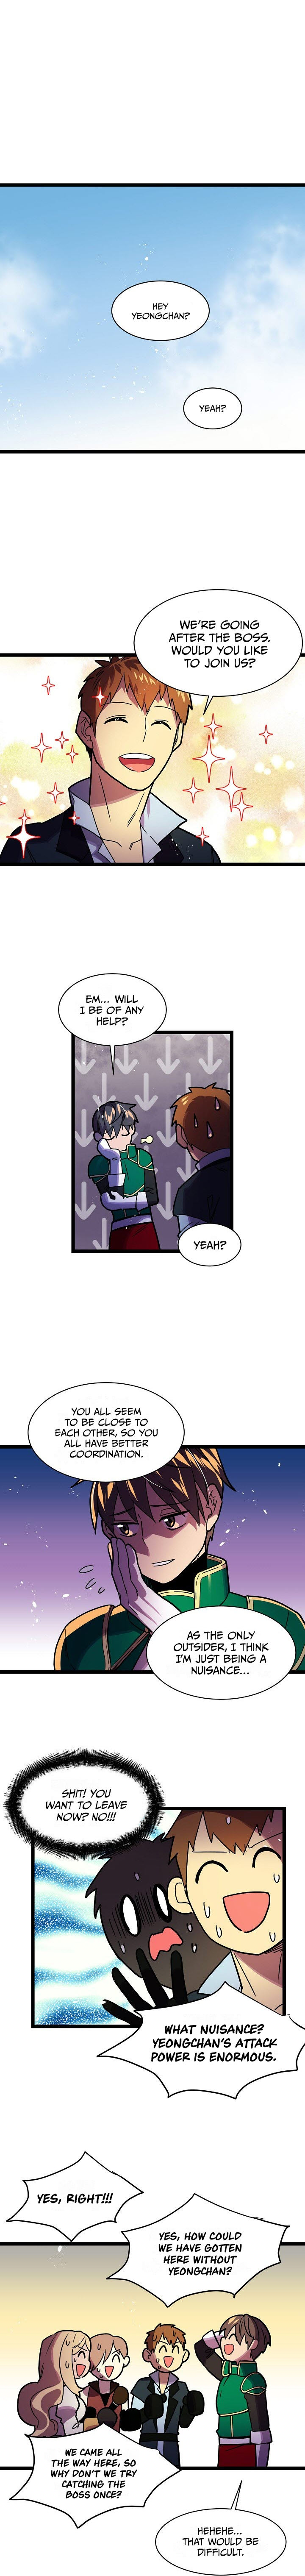 Ranker’s Return - Chapter 16 Page 2